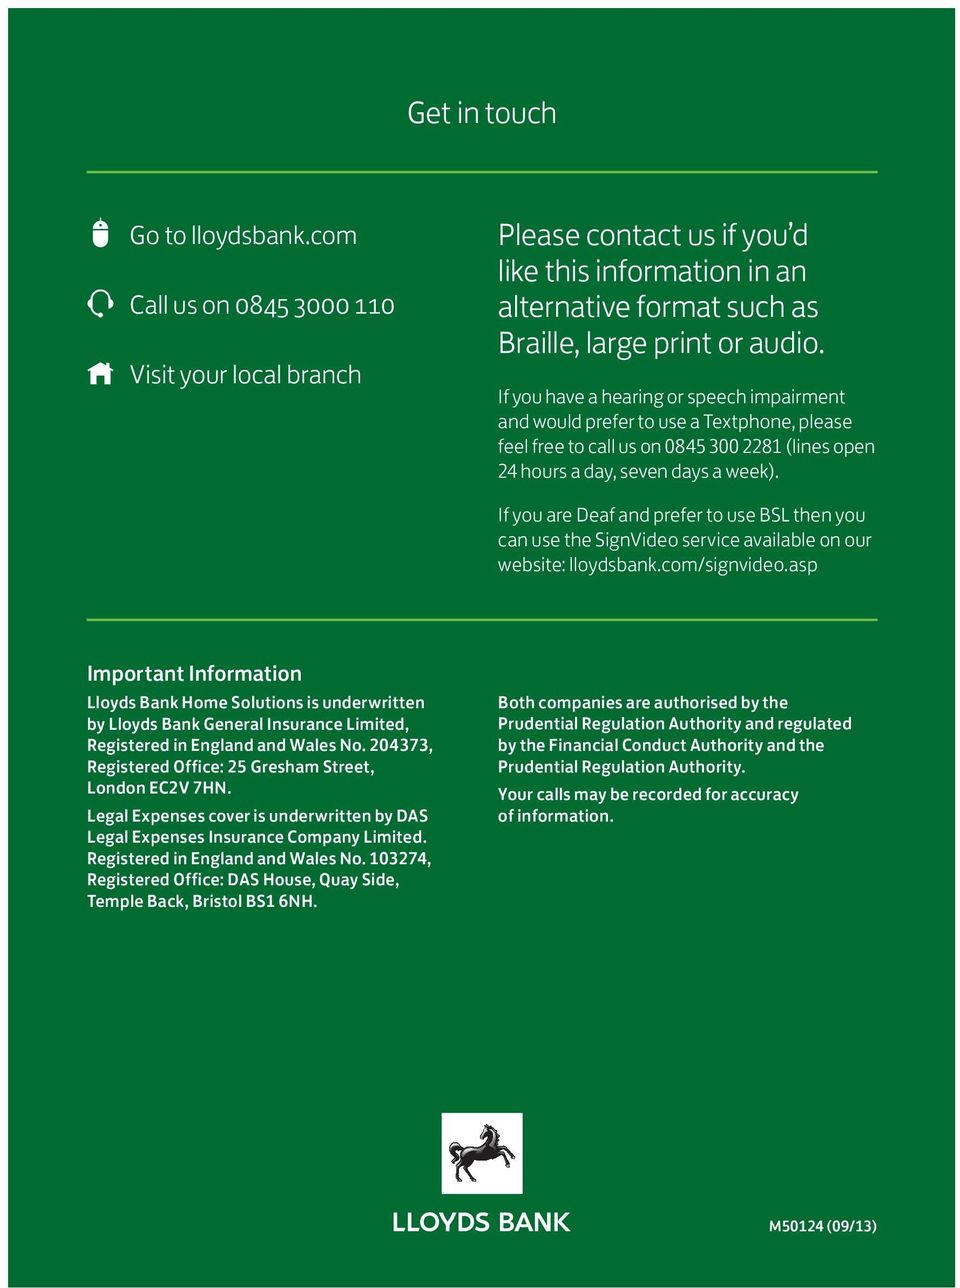 If you are Deaf and prefer to use BSL then you can use the SignVideo service available on our website: lloydsbank.com/signvideo.